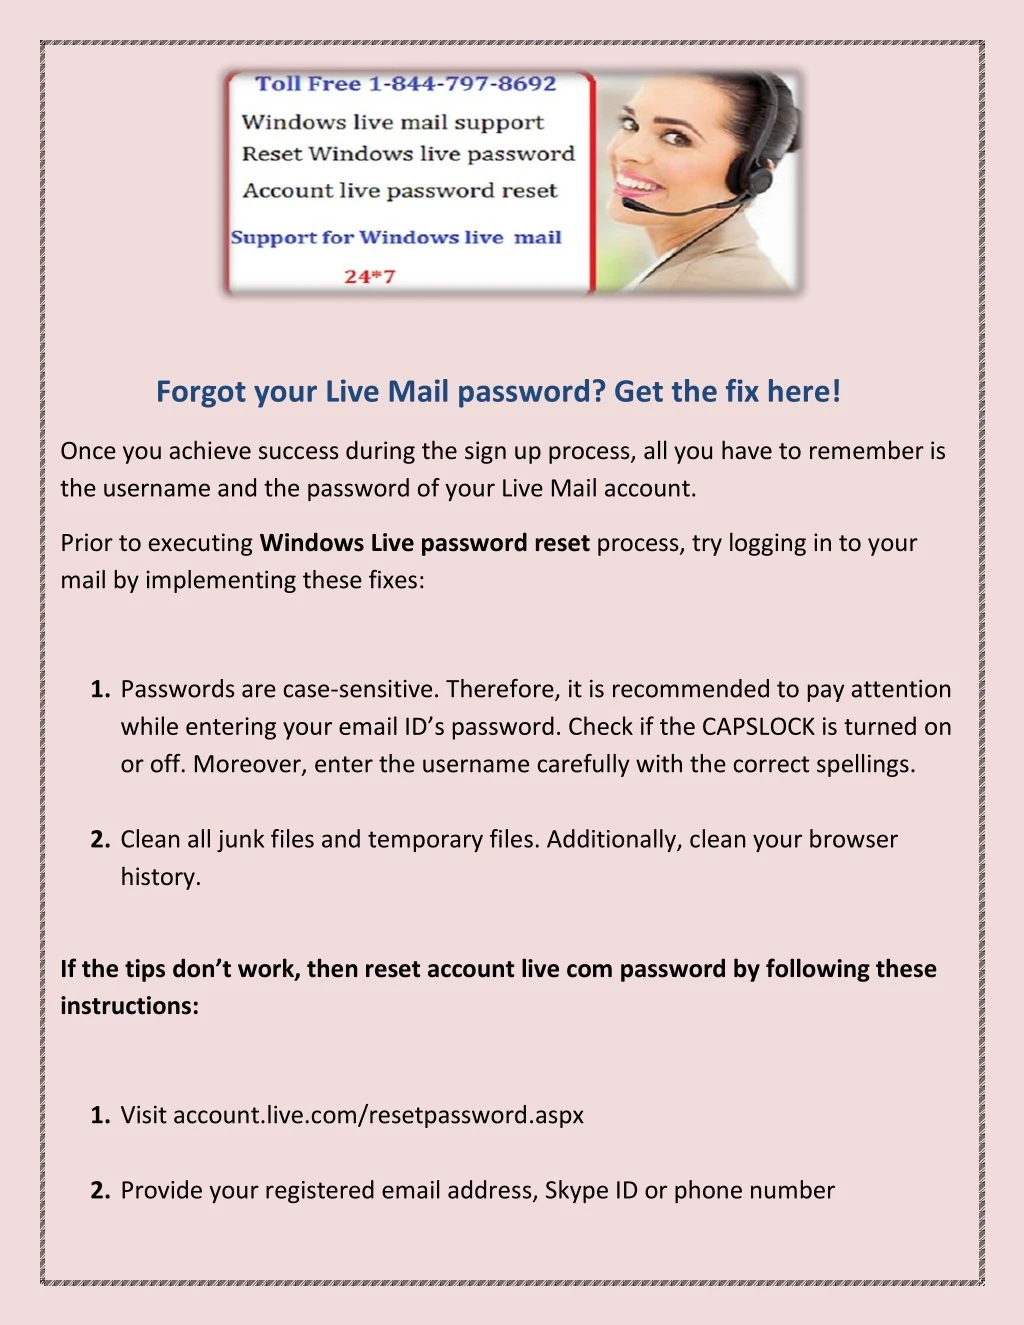 forgot your live mail password get the fix here